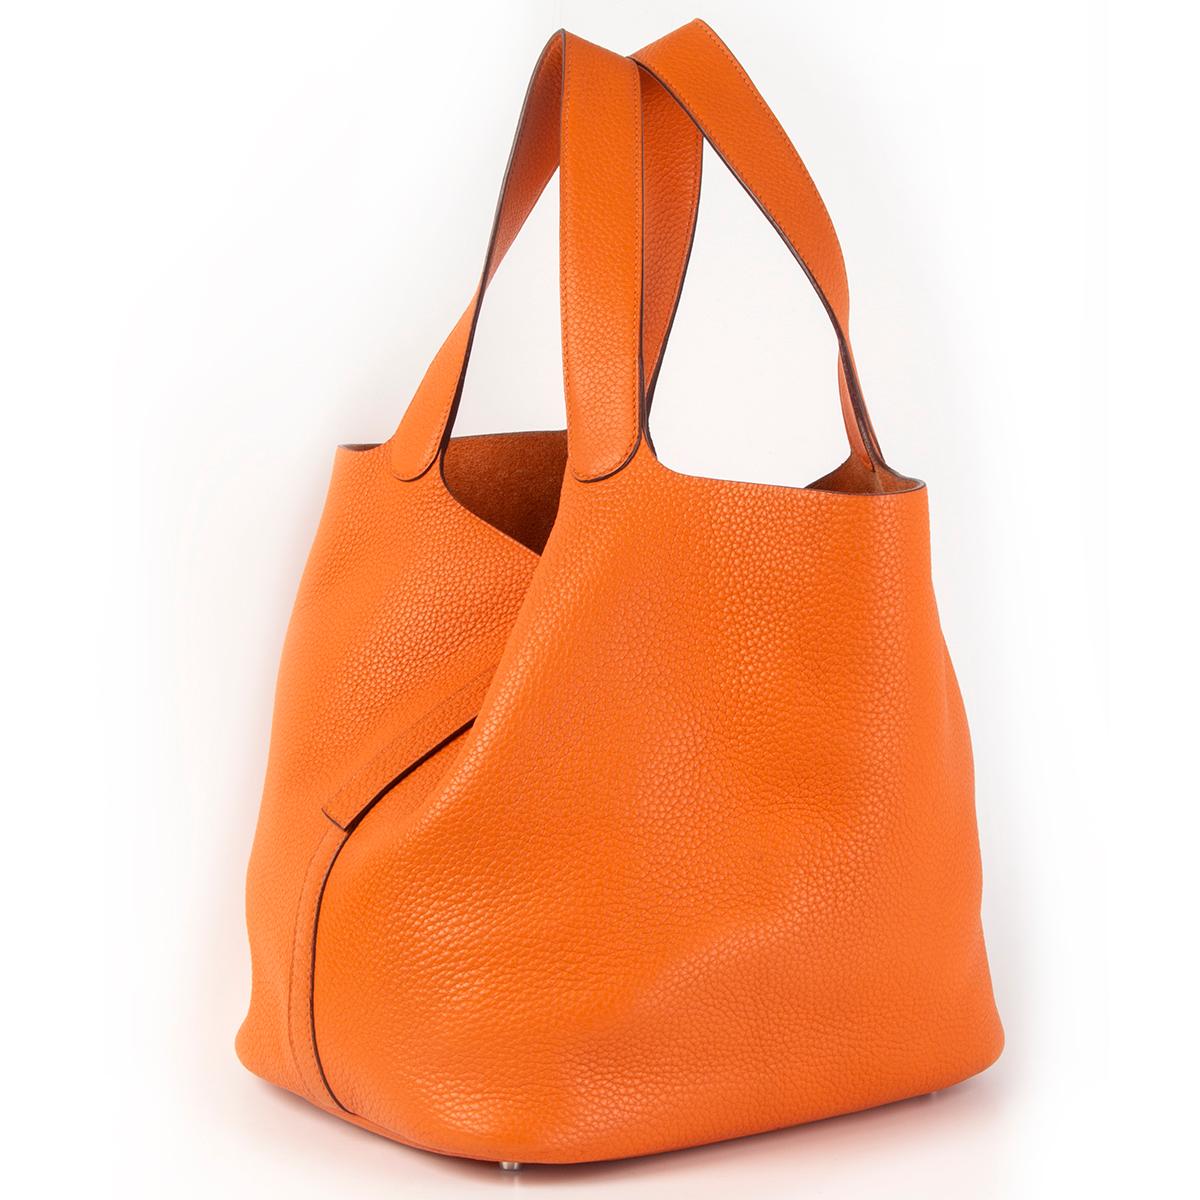 Hermès 'Picotin 26' bucket bag in orange Taurillon Clemence leather. Closes with a strap on top. Unlined. Has been worn and is in excellent condition.

Height 26cm (10.1in)
Width 26cm (10.1in)
Depth 21cm (8.2in)
Drop of the Handle 19cm